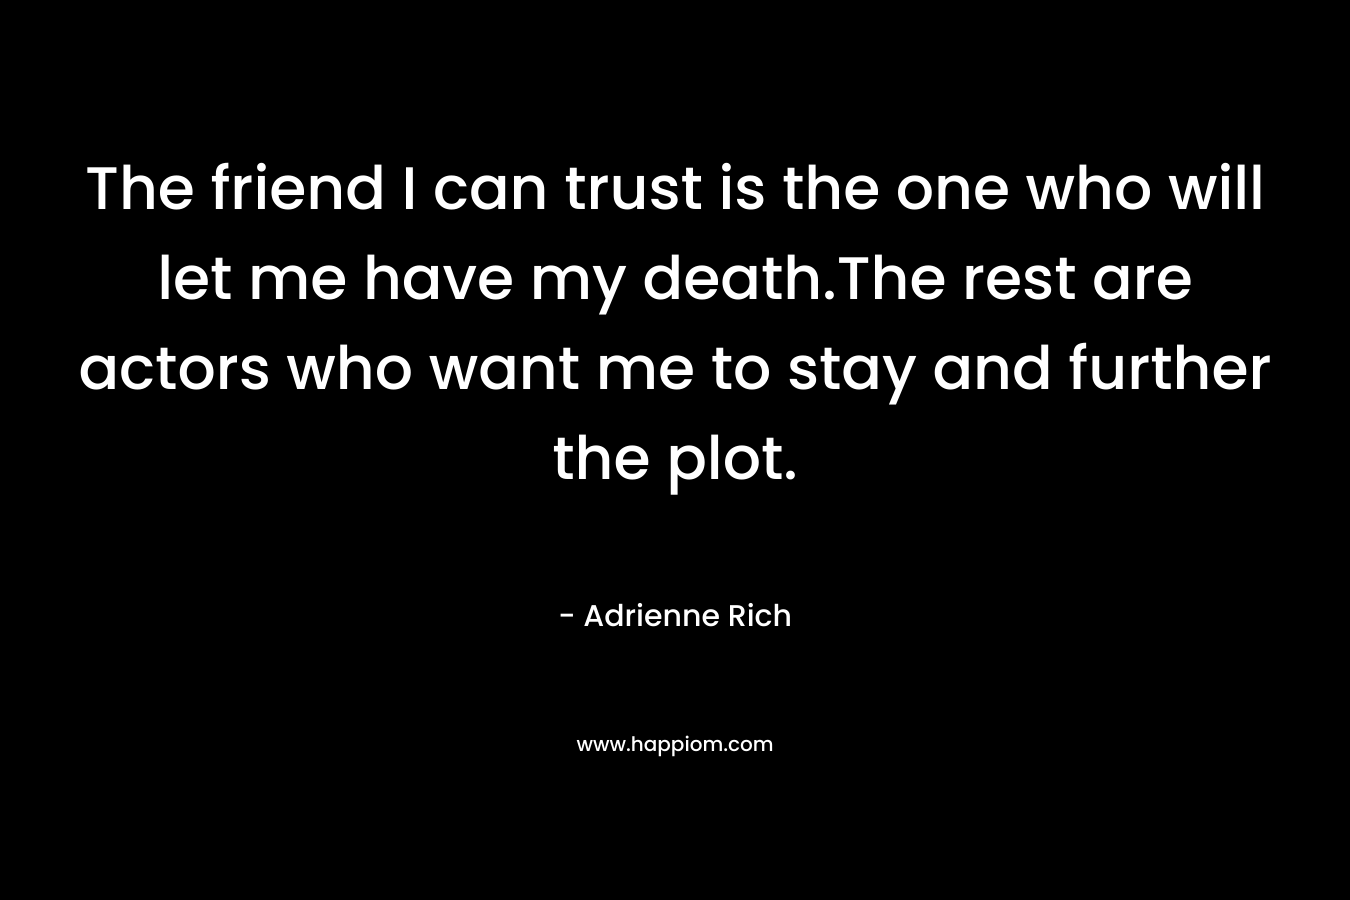 The friend I can trust is the one who will let me have my death.The rest are actors who want me to stay and further the plot. – Adrienne Rich